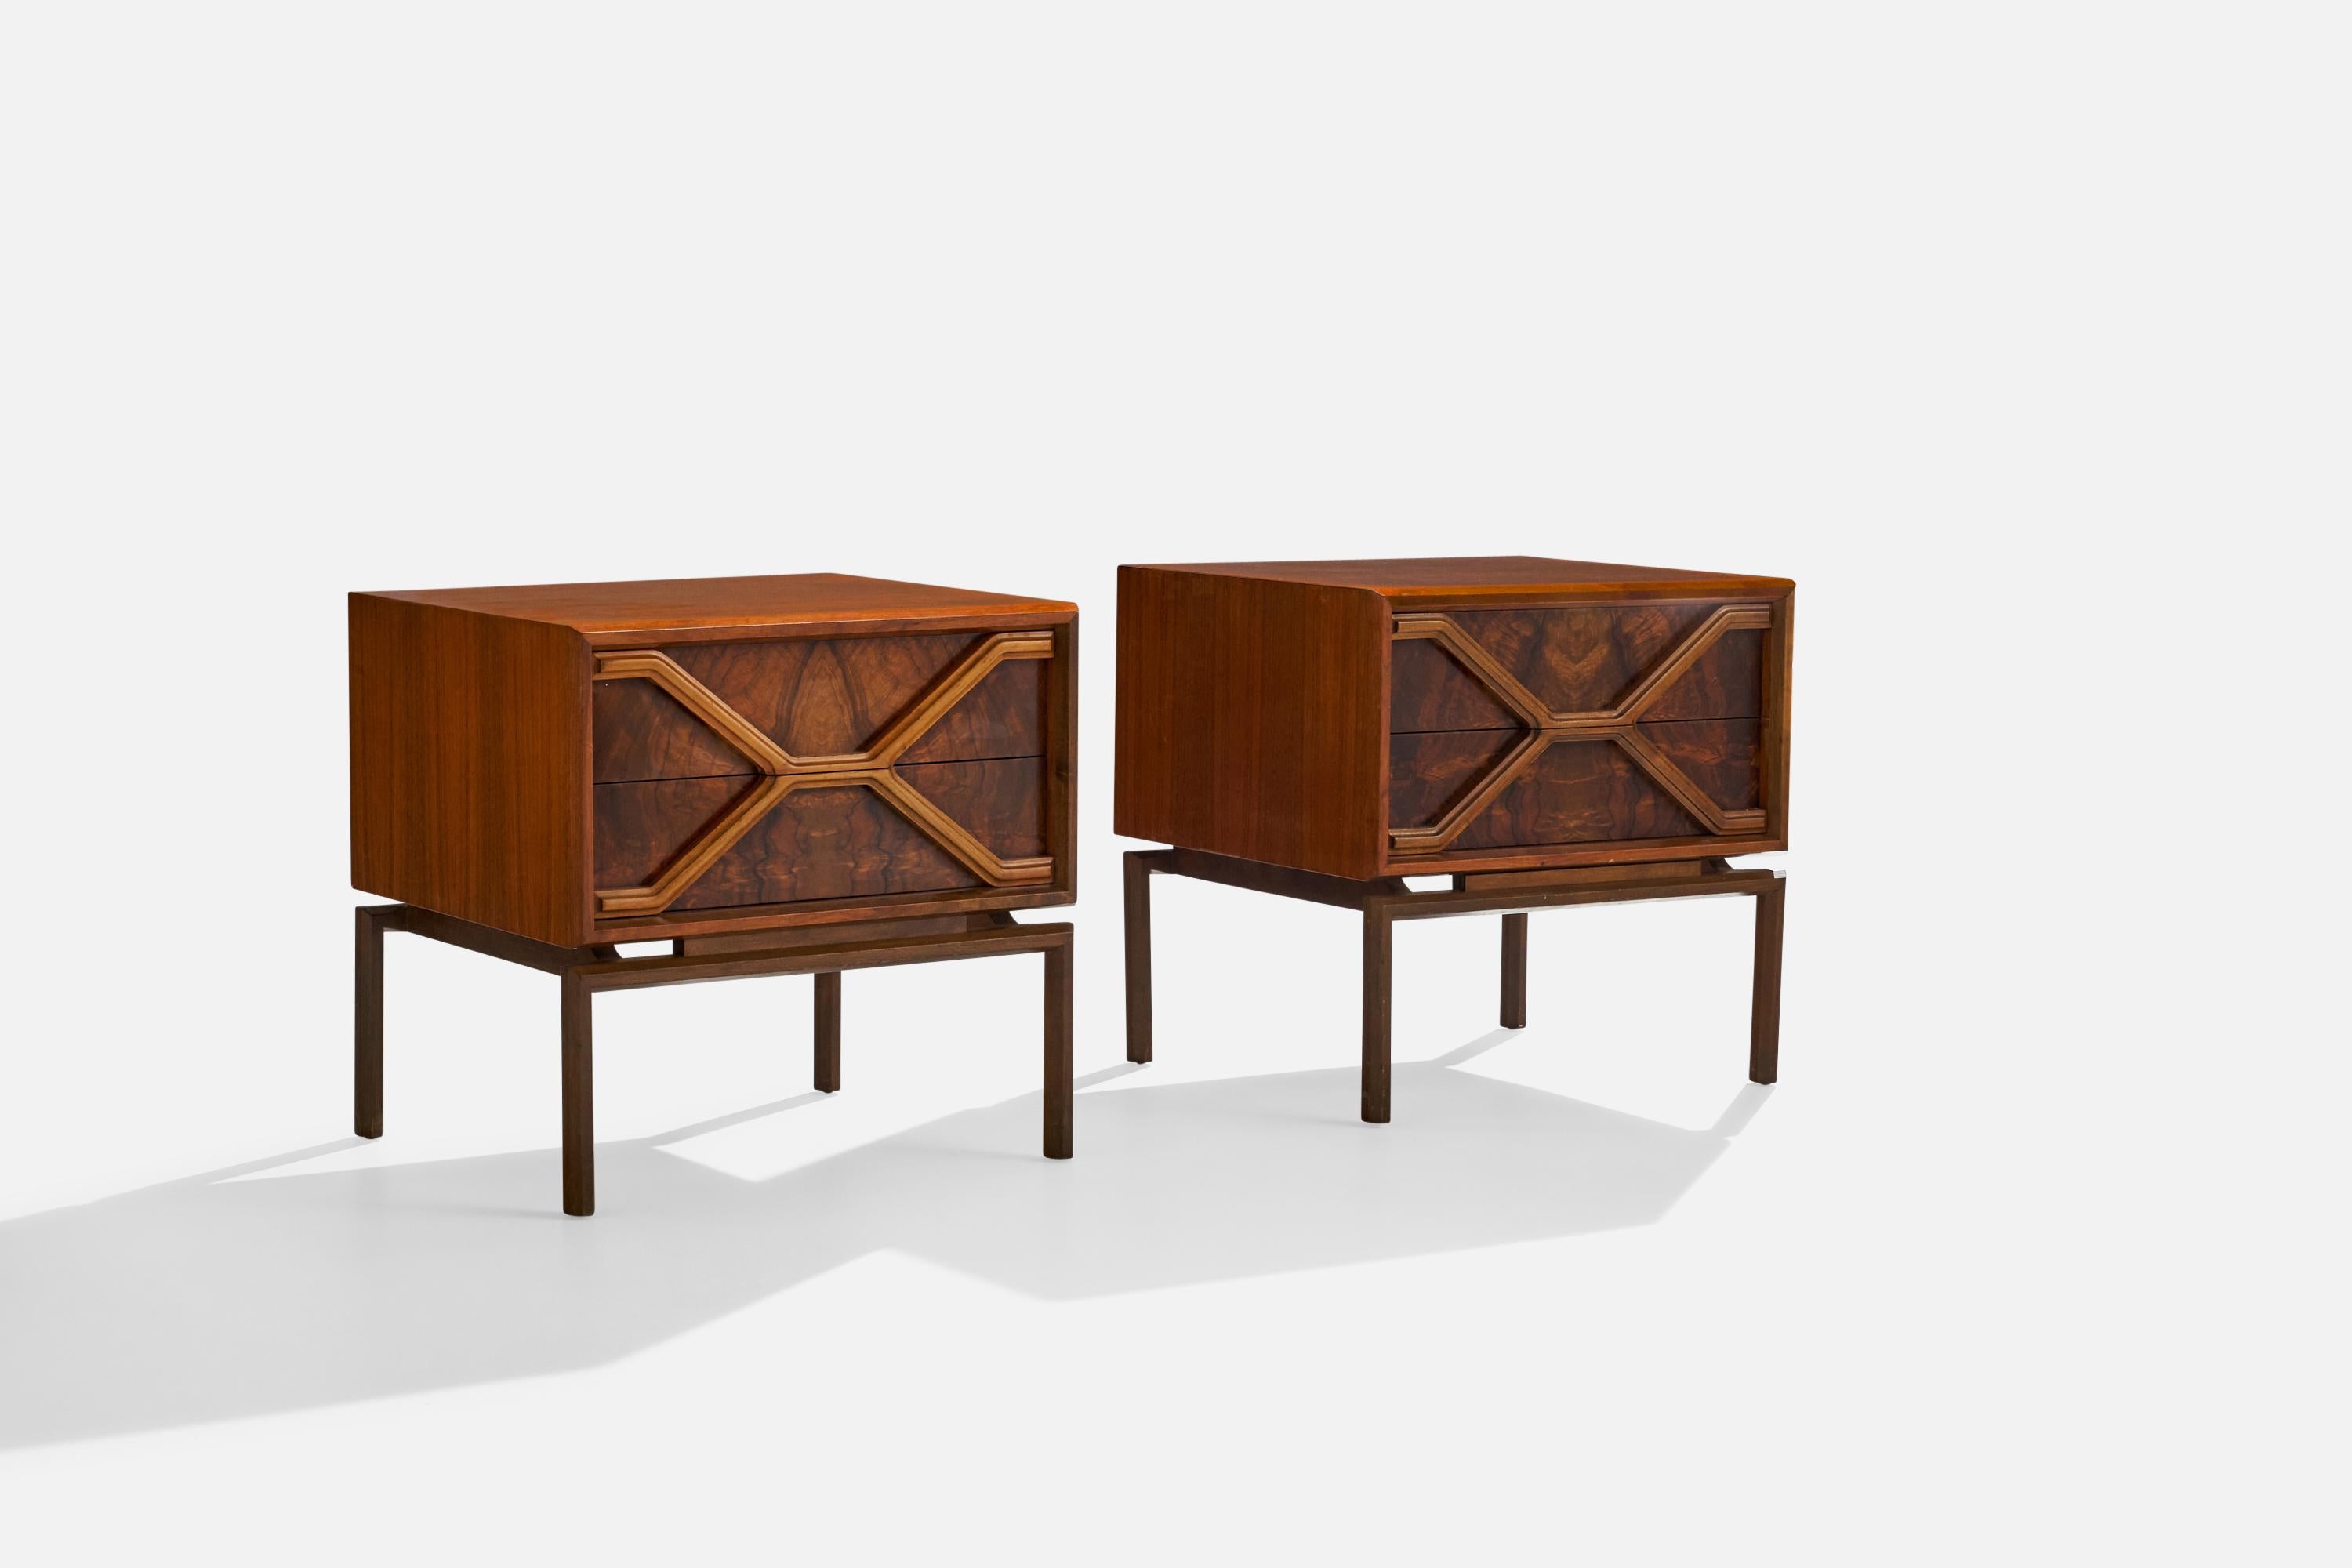 A pair of rosewood nightstands or bedside cabinets designed and produced by American designer Edmond J. Spence and produced in Sweden, c. 1950s.